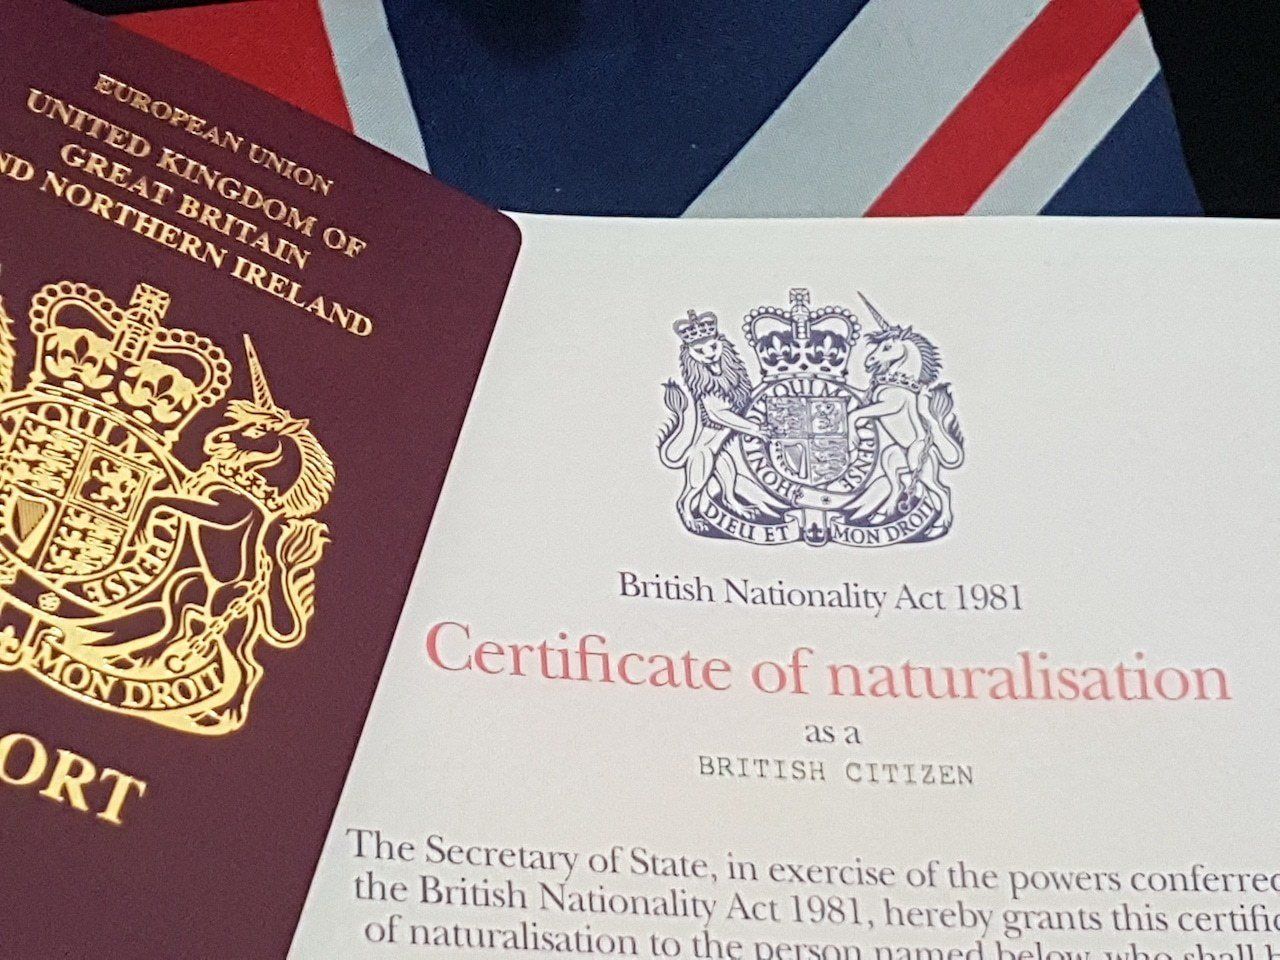 Requirements for Naturalisation as a British Citizen